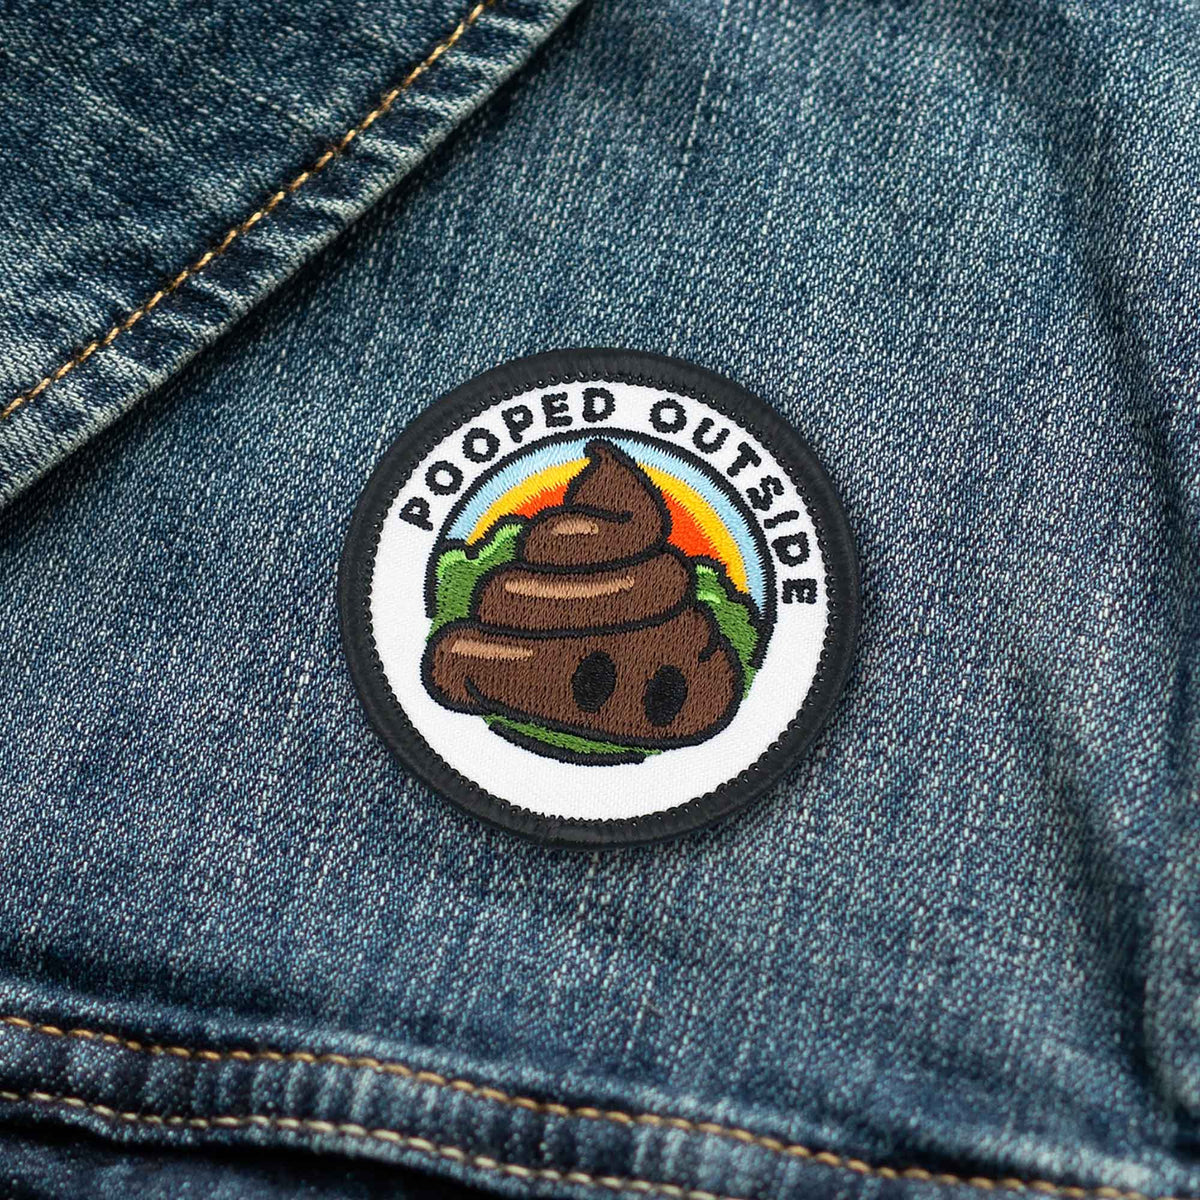 Pooped Outside individual adulting merit badge patch for adults on denim jacket